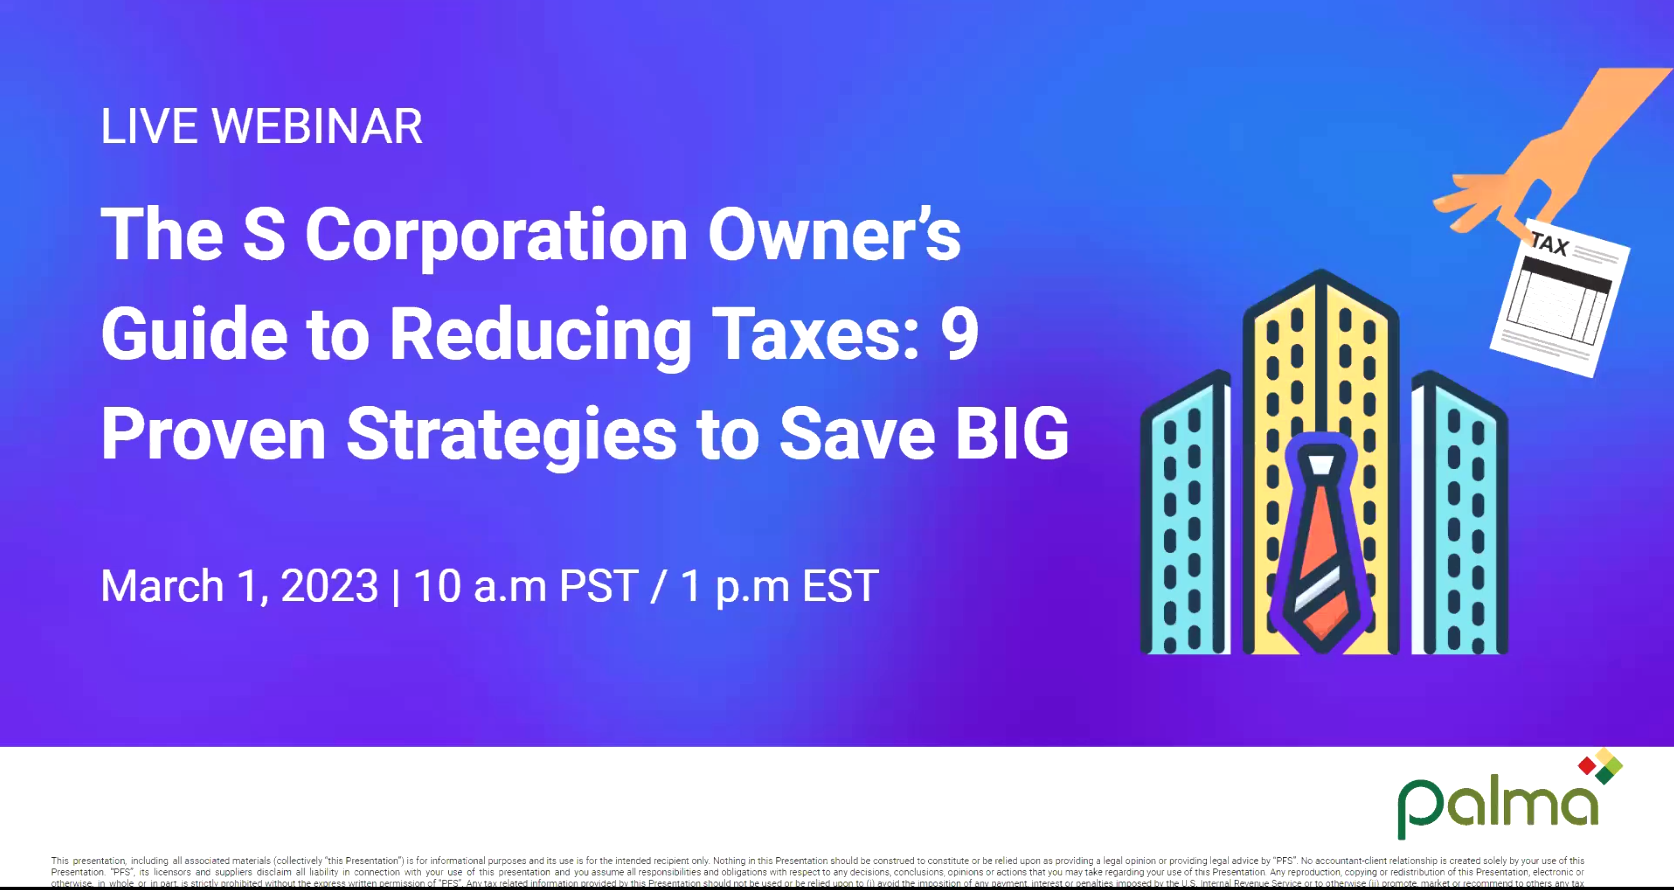 The S Corporation Owner's Guide to Reducing Taxes